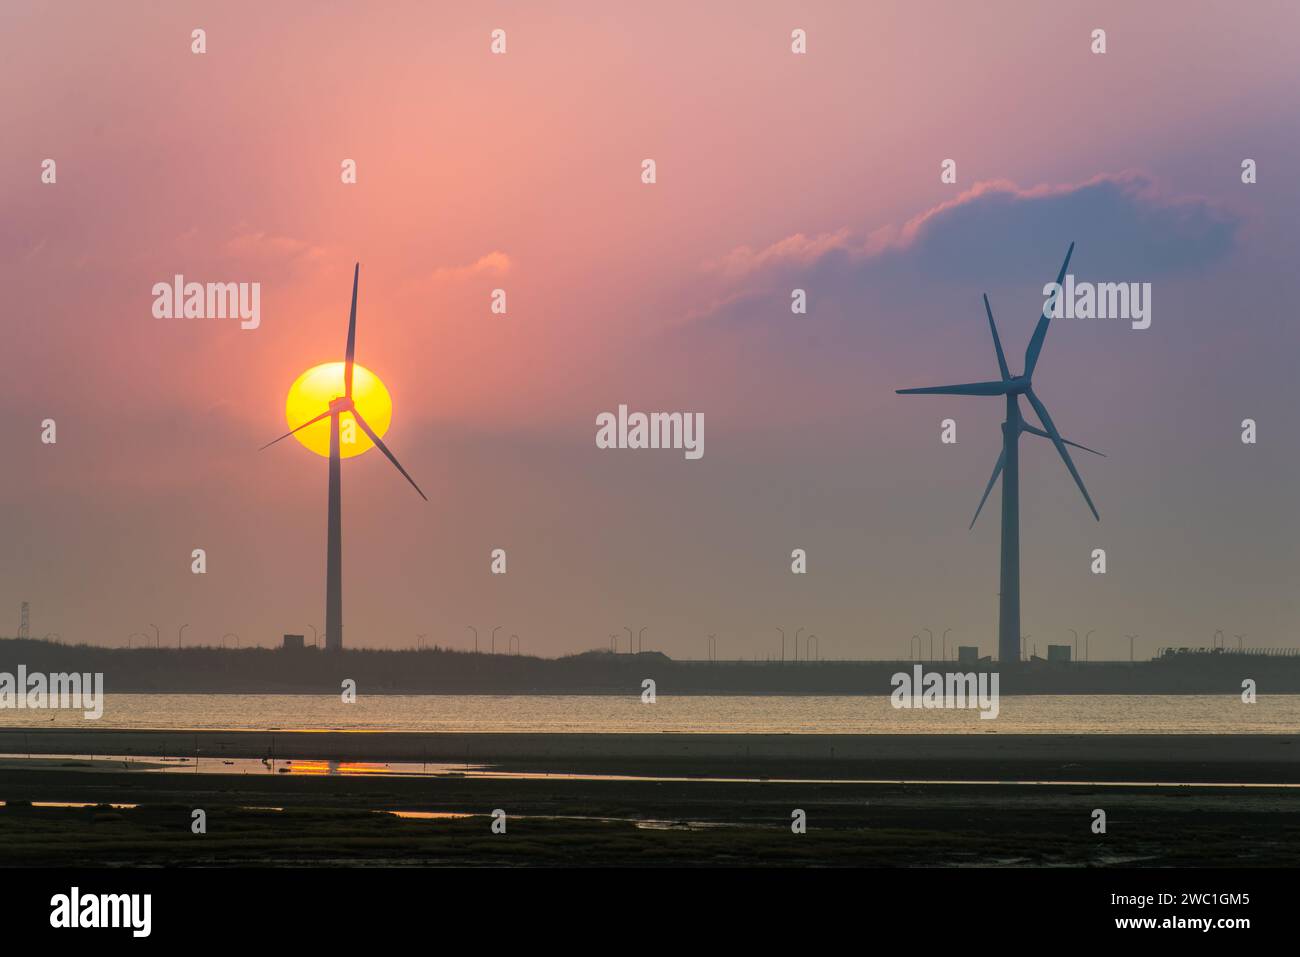 Offshore wind farms are great for enjoying the scenery and watching the sunset. Gaomei Windmill Avenue. Taichung Harbor Wind Power Station. Taiwan. Stock Photo